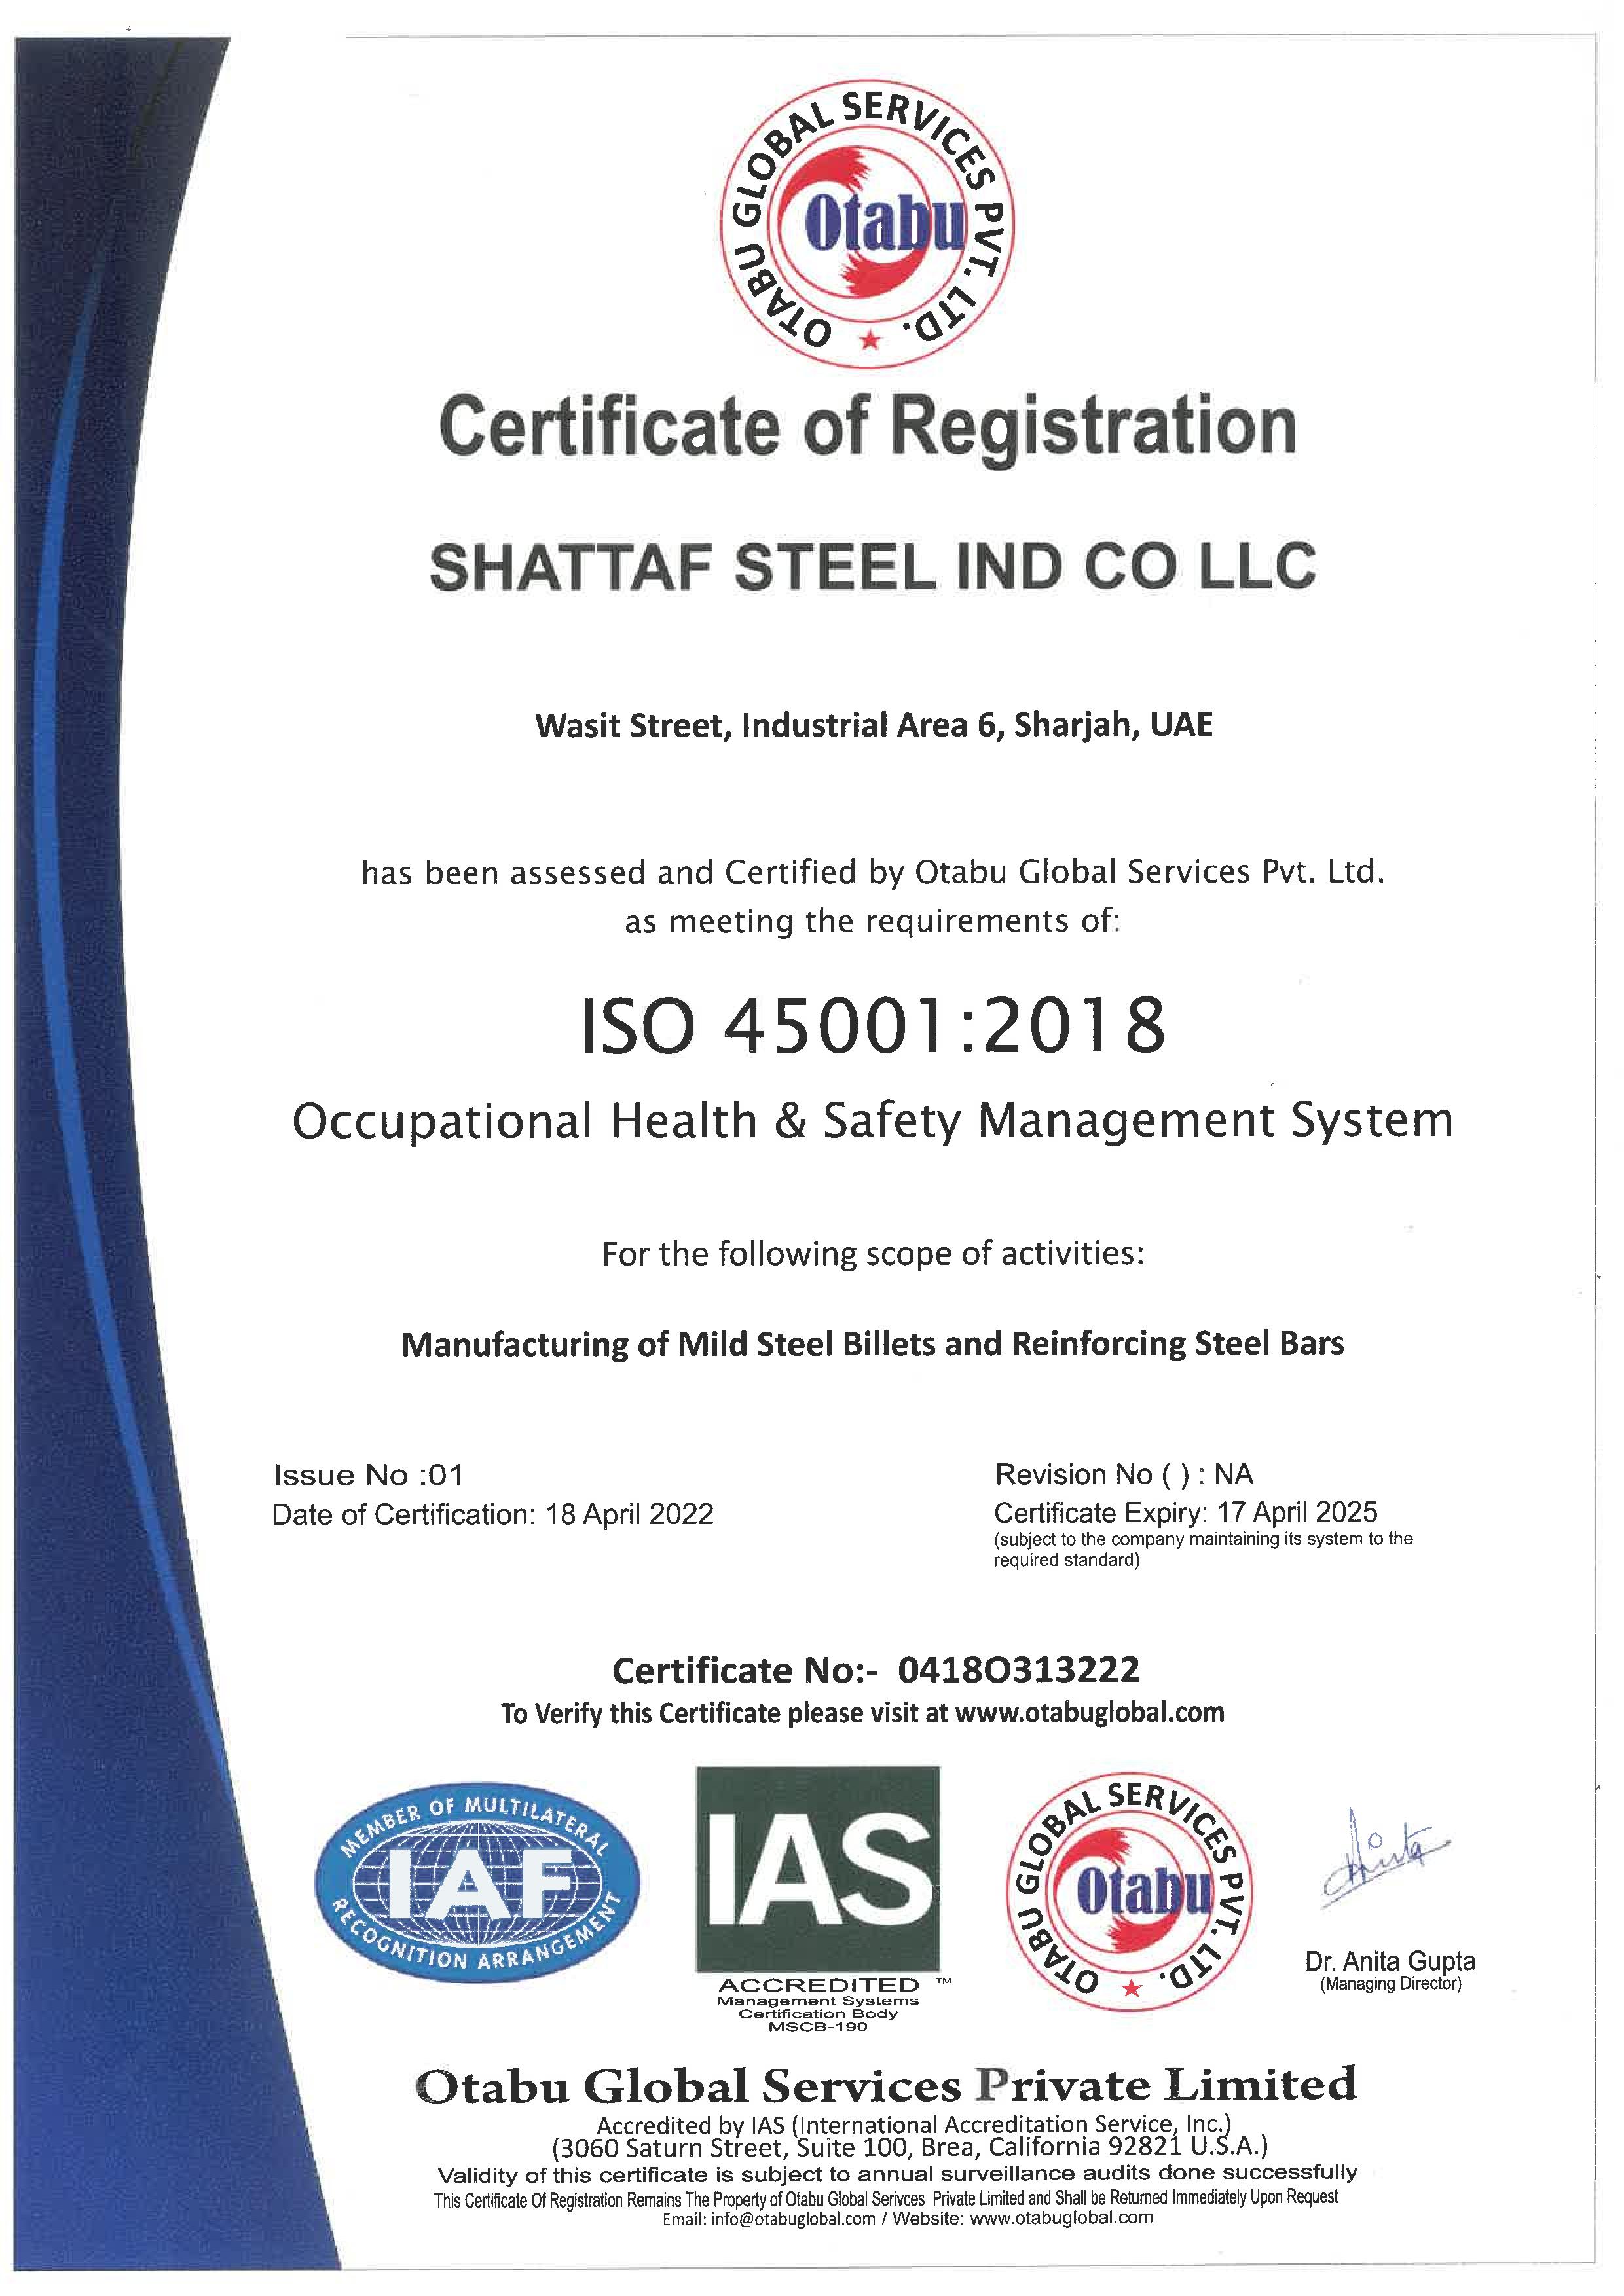 ISO 45001:2018 – Occupational Health & Safety Management System